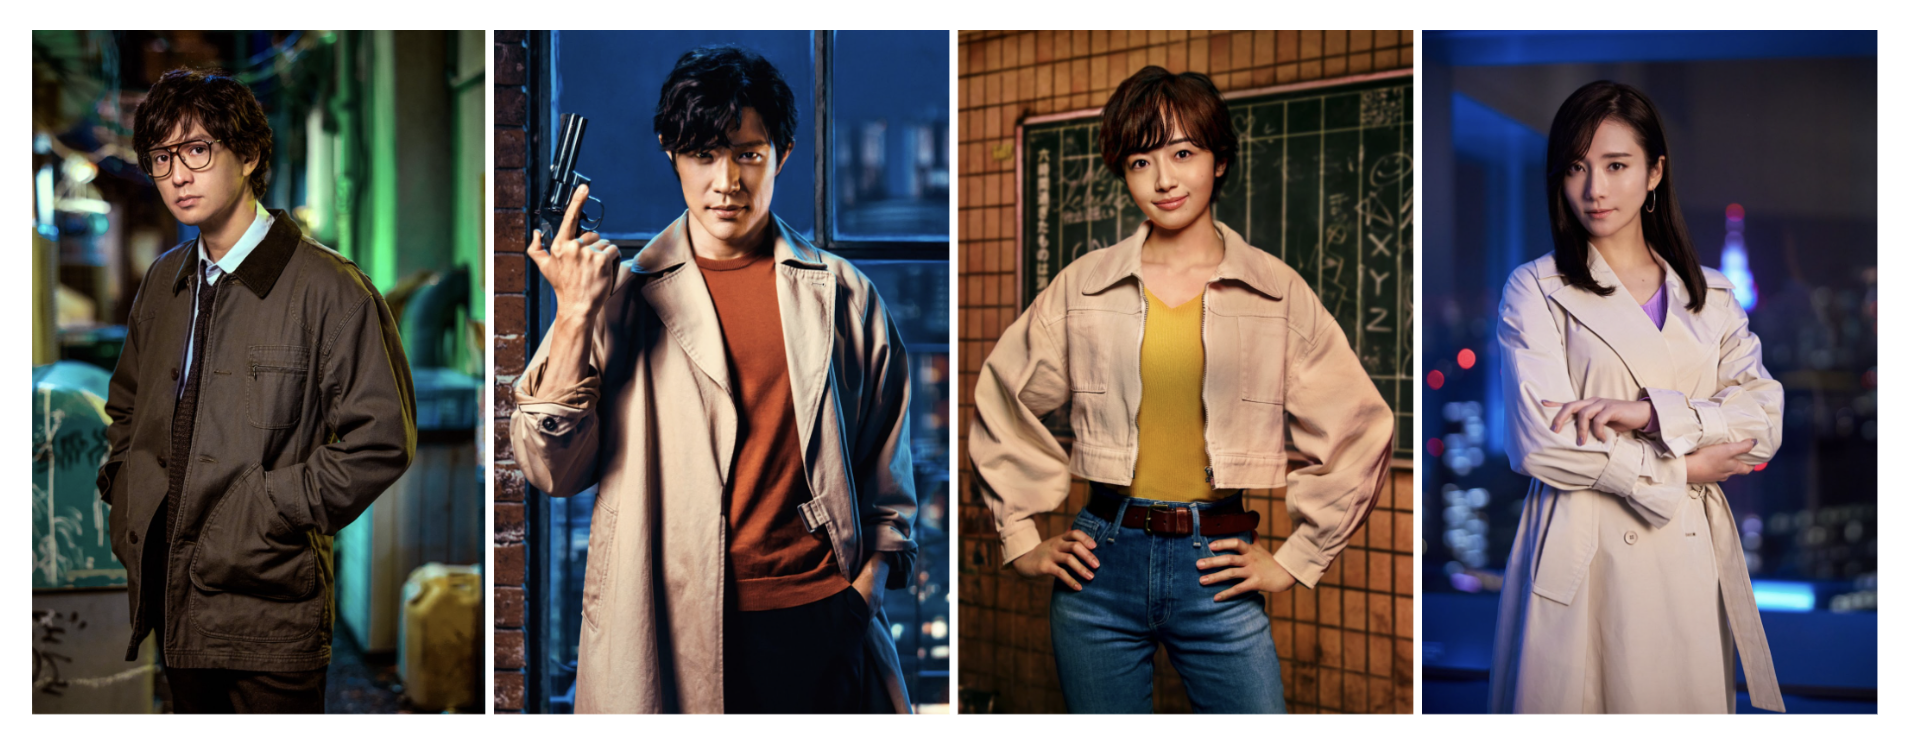 Meet the Additional Cast of ‘City Hunter’ and Their OnScreen Personas